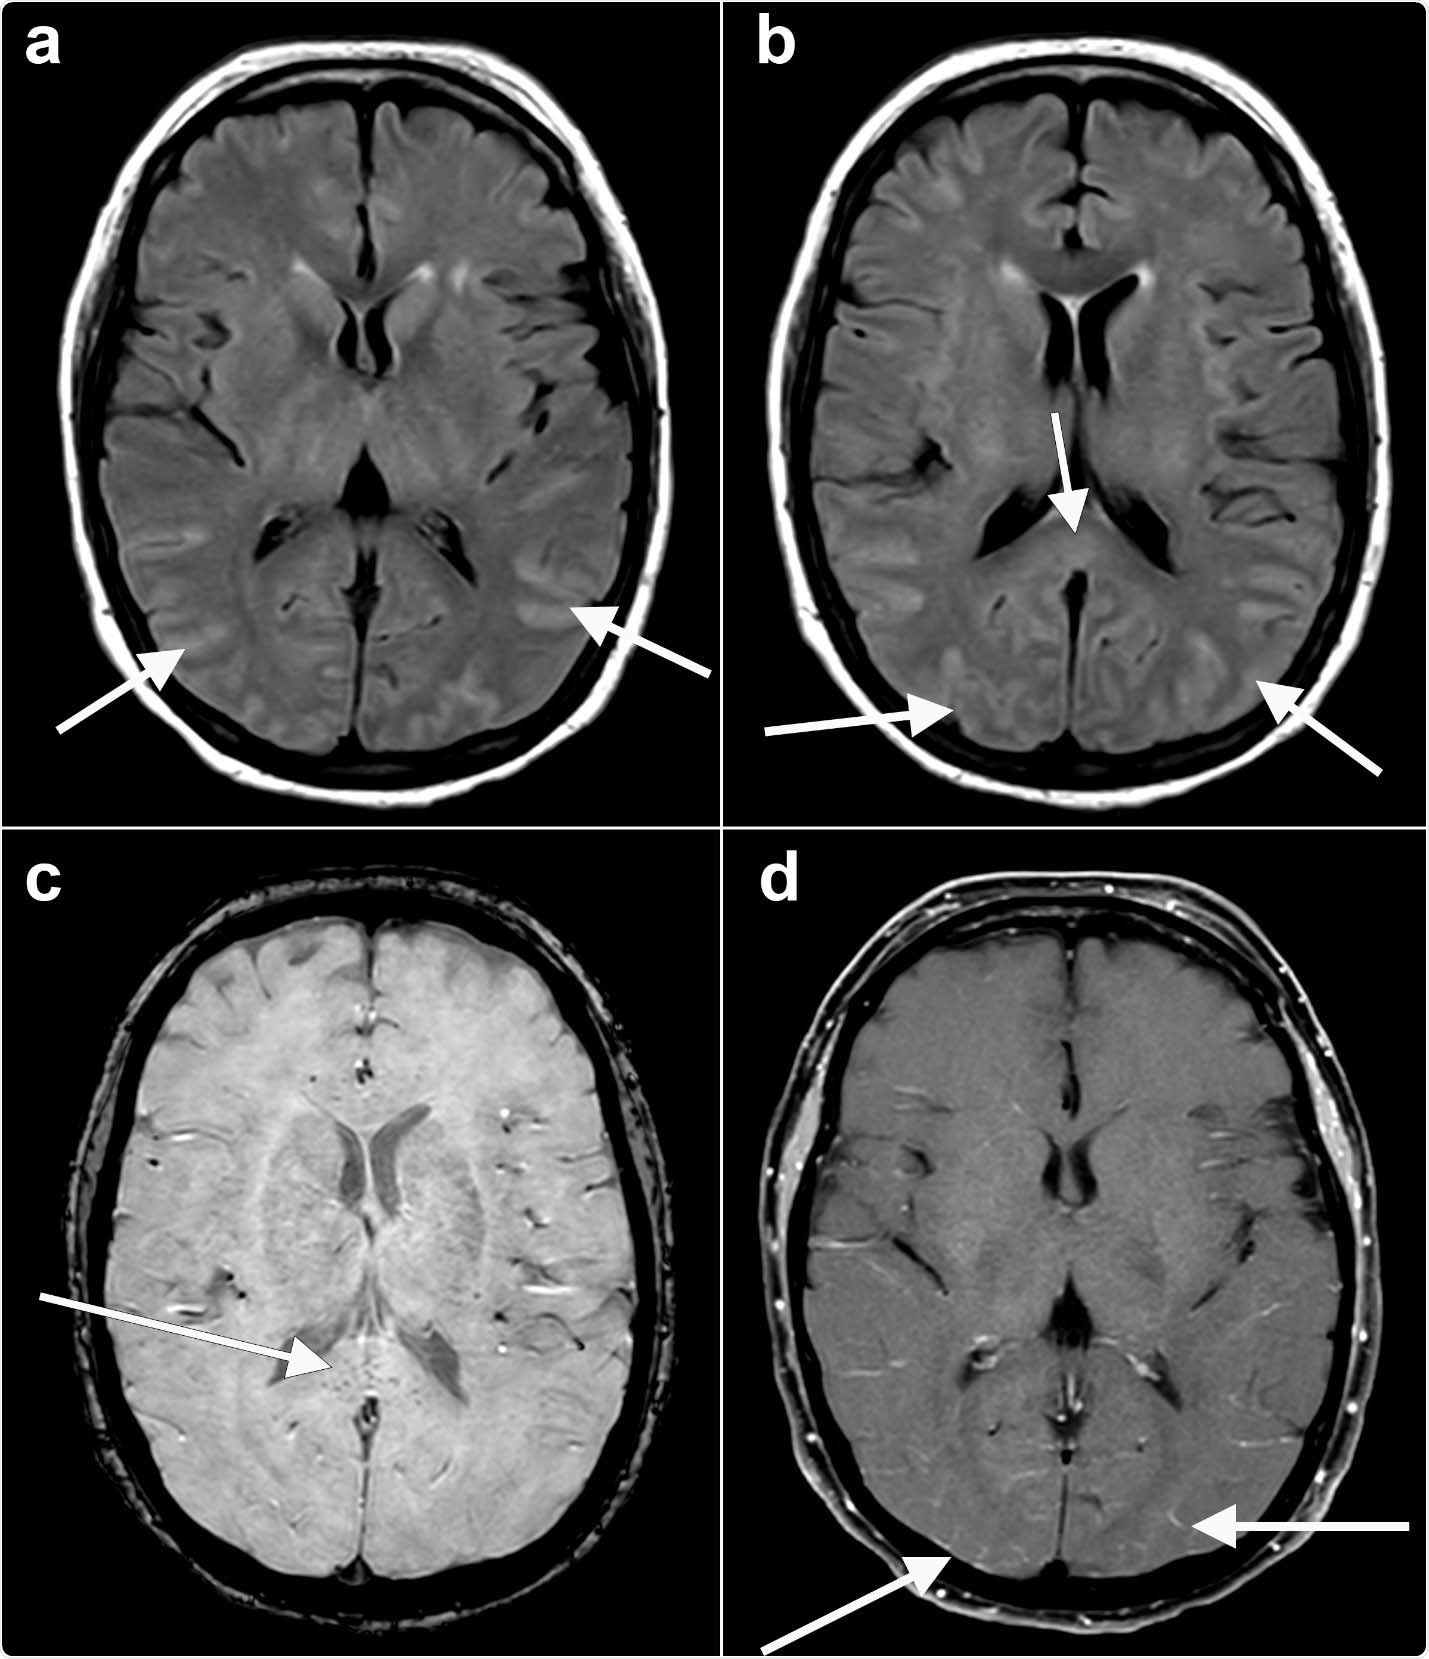 Axial fluid-attenuated inversion recovery (FLAIR) (a, b) images at the level of the basal ganglia show abnormal FLAIR hyperintense signal (arrows) affecting the bilateral occipital, temporal lobes. This appears almost sulcal suggesting a higher protein component within the cerebrospinal fluid. Note the elevated FLAIR signal in the splenium of the corpus callosum (arrow) suggesting parenchymal insult. Axial susceptibility weighted imaging (SWI) (c) at the level of the splenium of the corpus callosum shows small areas of susceptibility (arrow) in the splenium, likely related to microhemorrhage. Axial T1 (d) postcontrast with fat suppression at the level of the basal ganglia shows subtle, though true, enhancement (arrows) in the posterior sulci, arachnoid pial (leptomeningeal) pattern suggesting a degree of encephalitis.